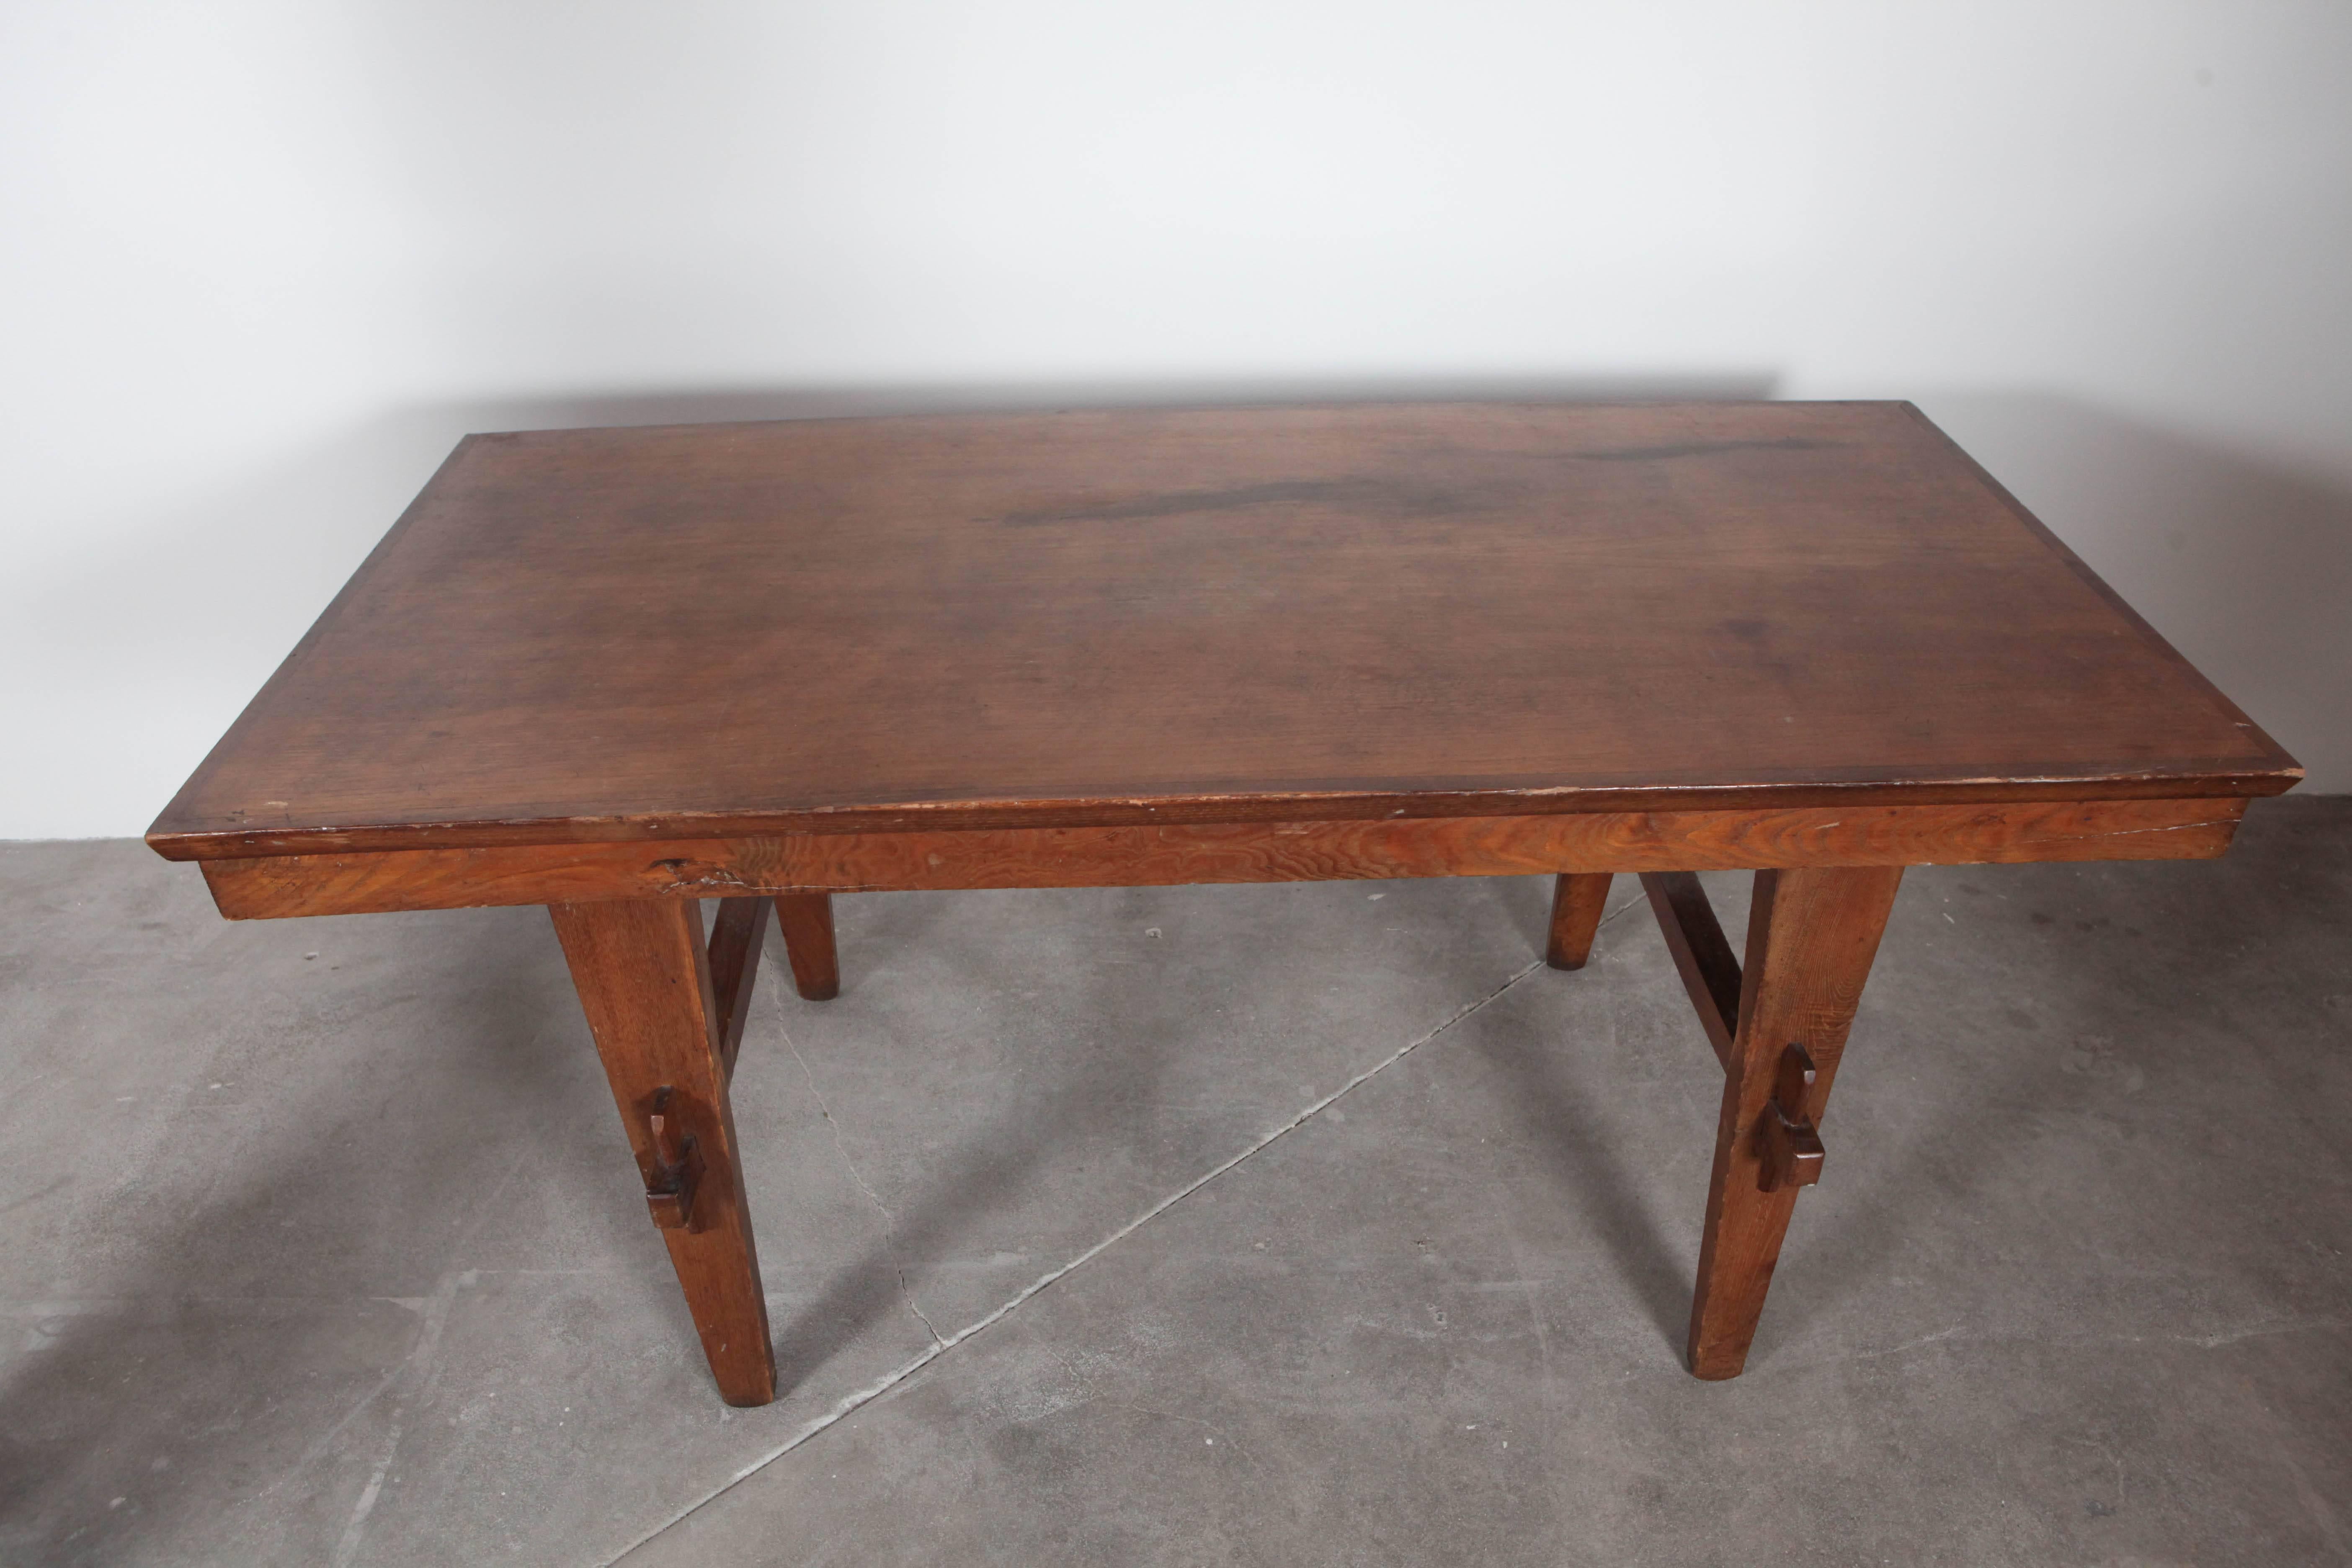 Vintage dining table with peg and groove leg supports.